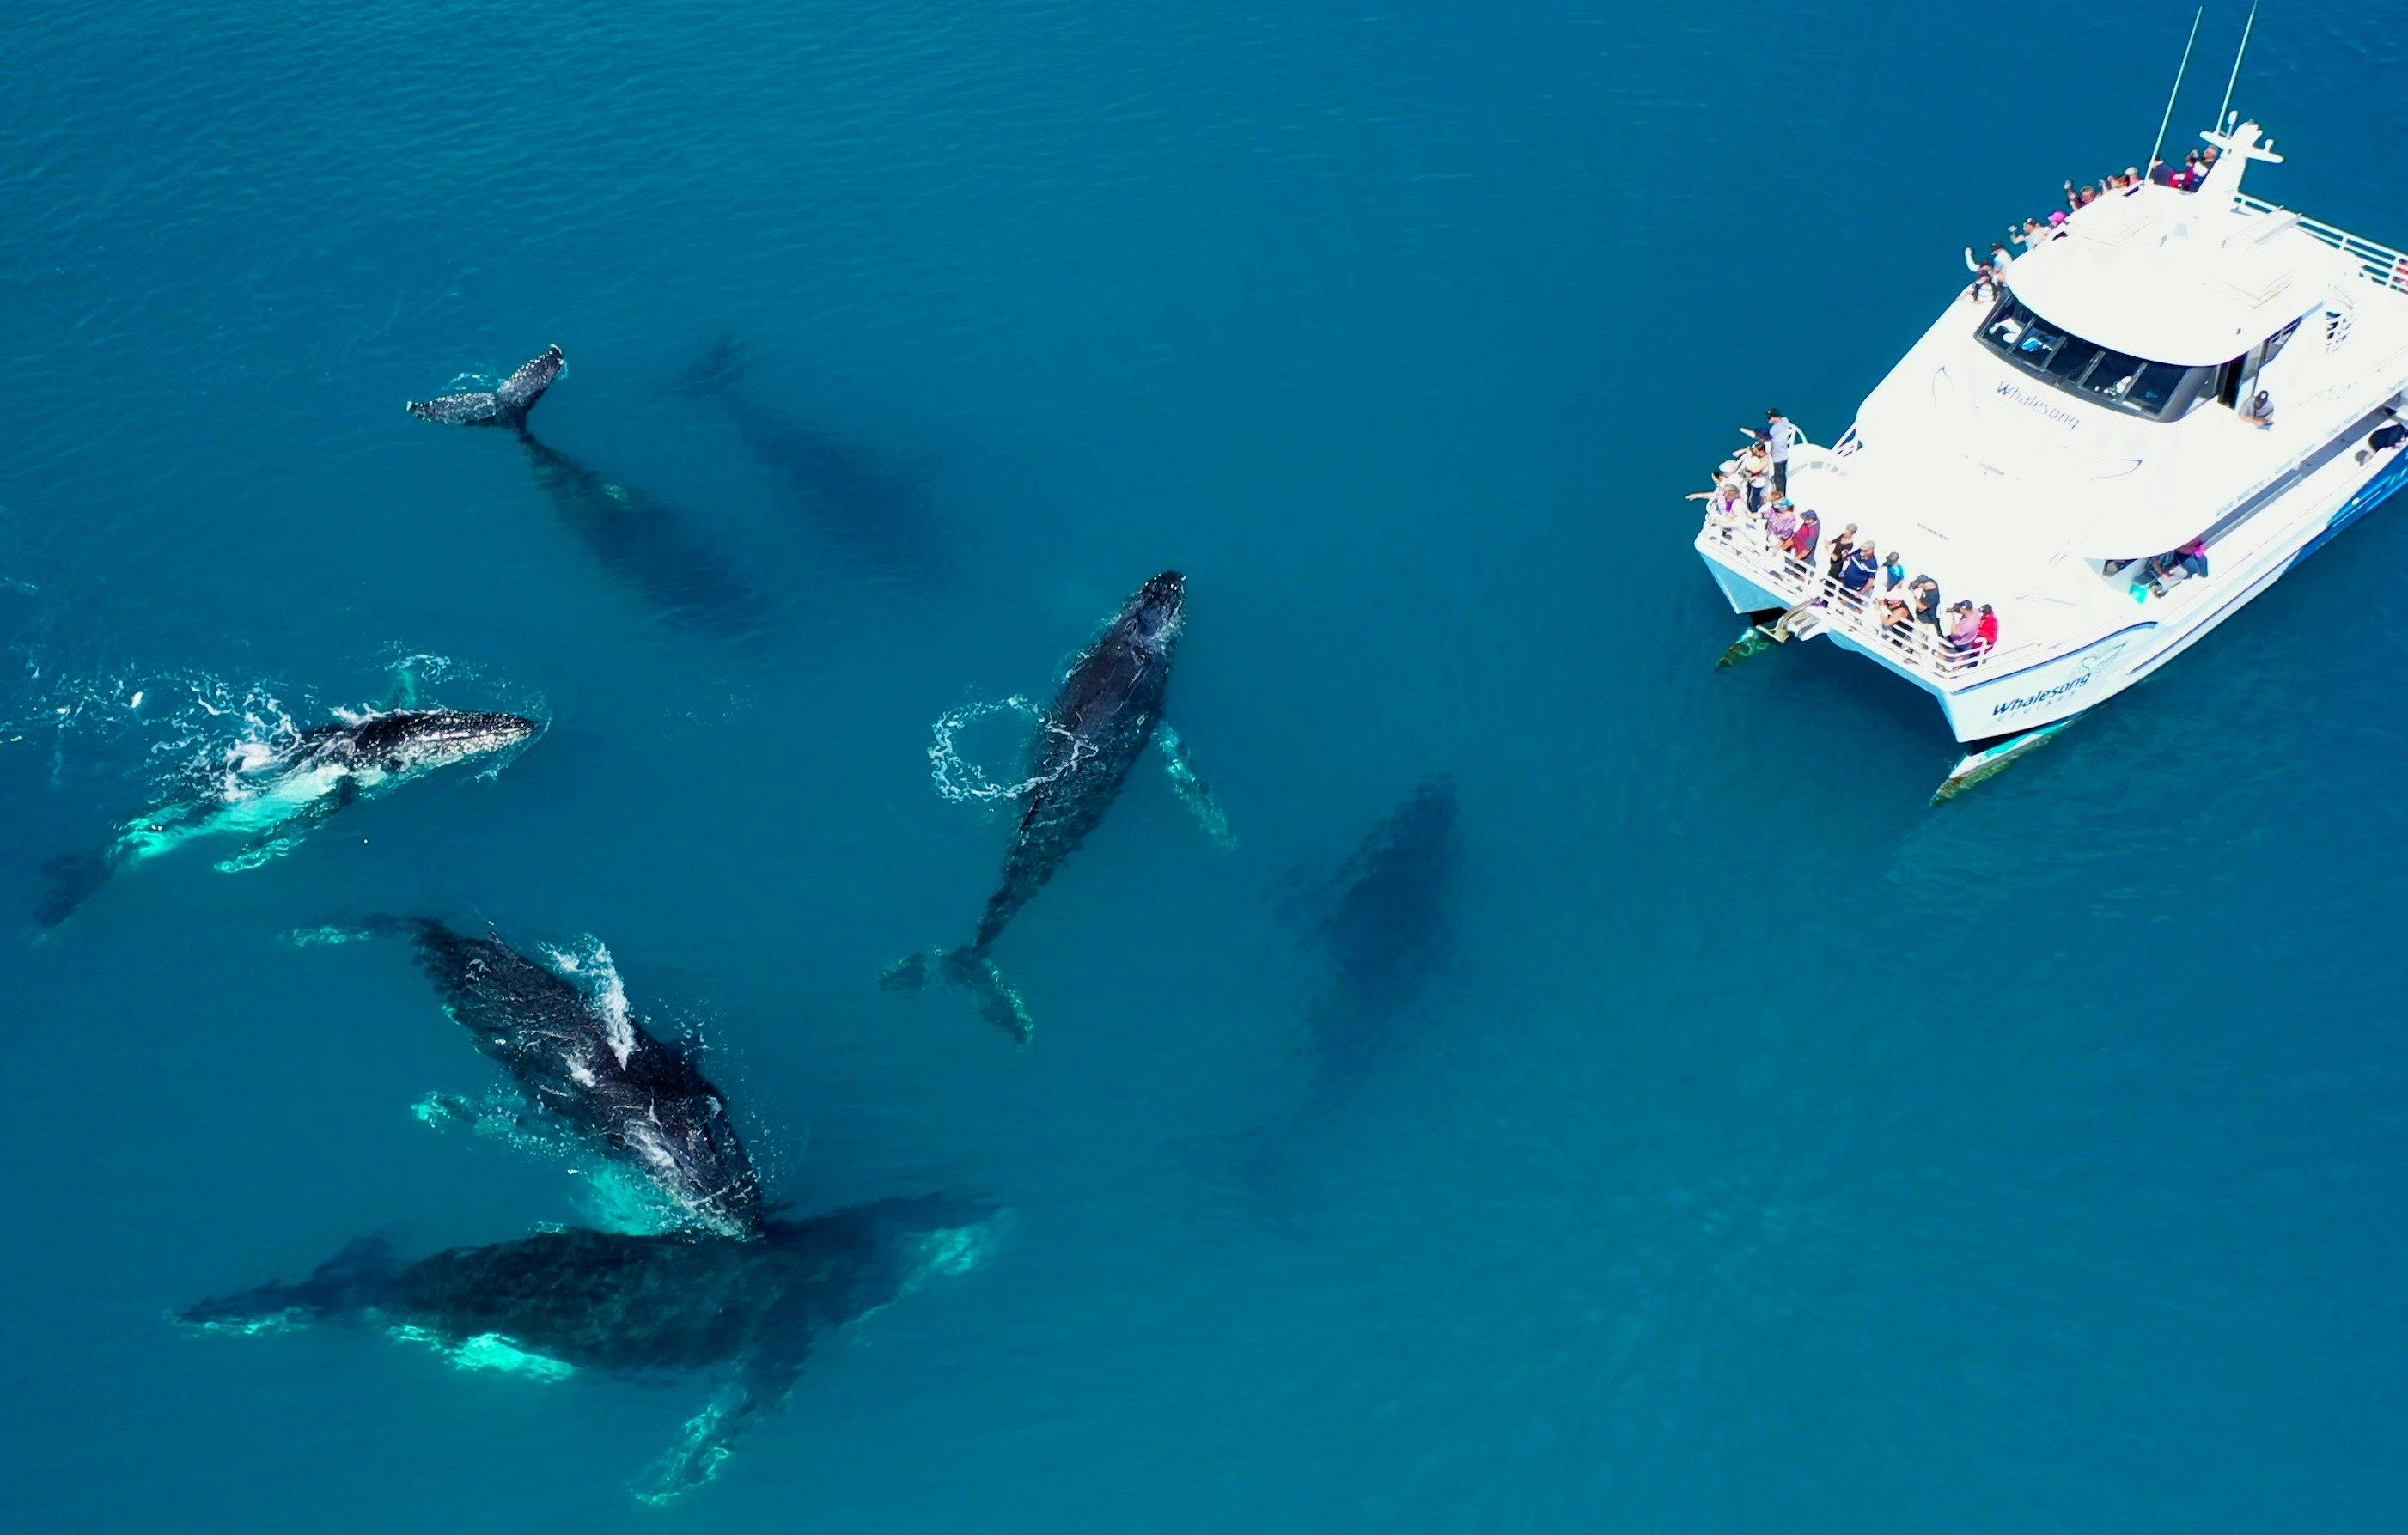 whale watching tours on east coast